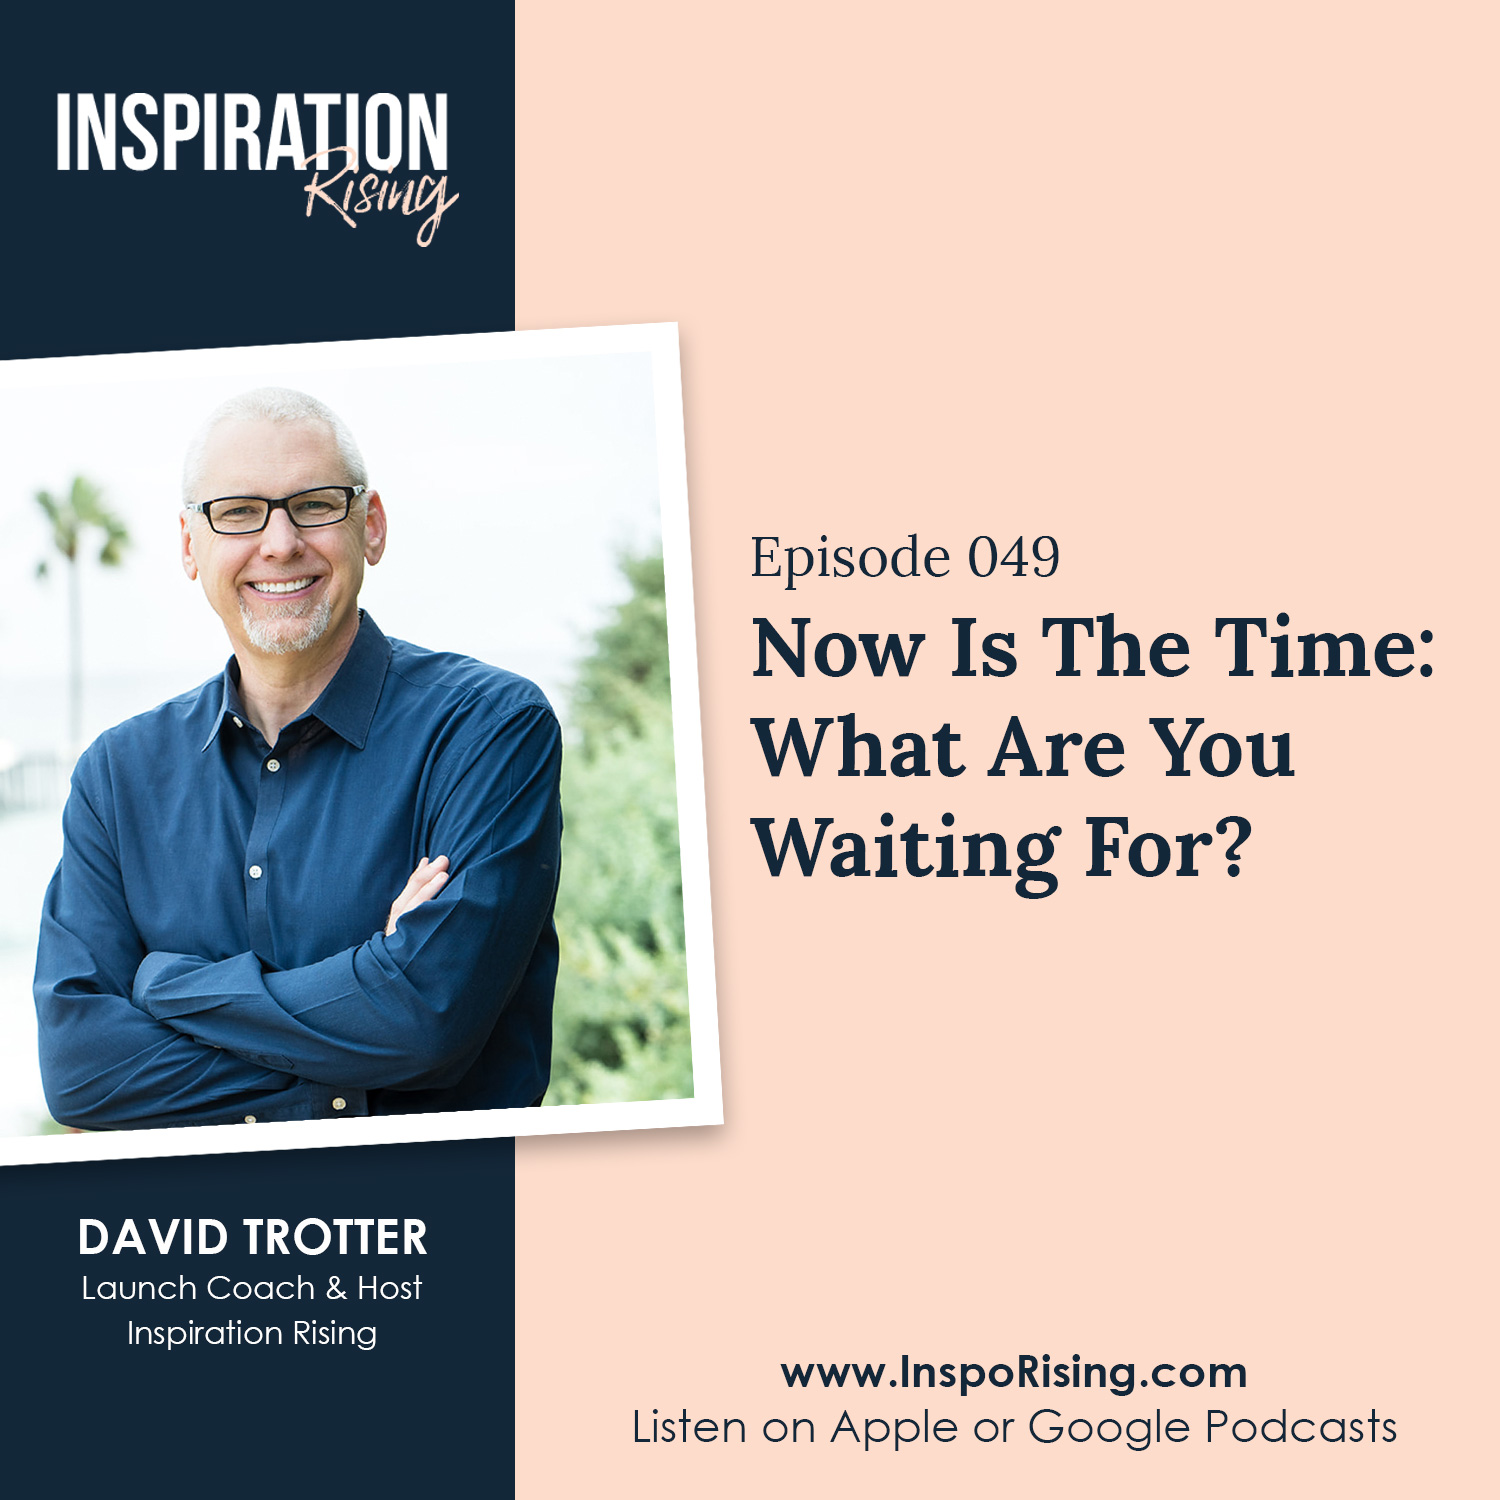 David Trotter - Inspiration Rising Launch Coach and Host